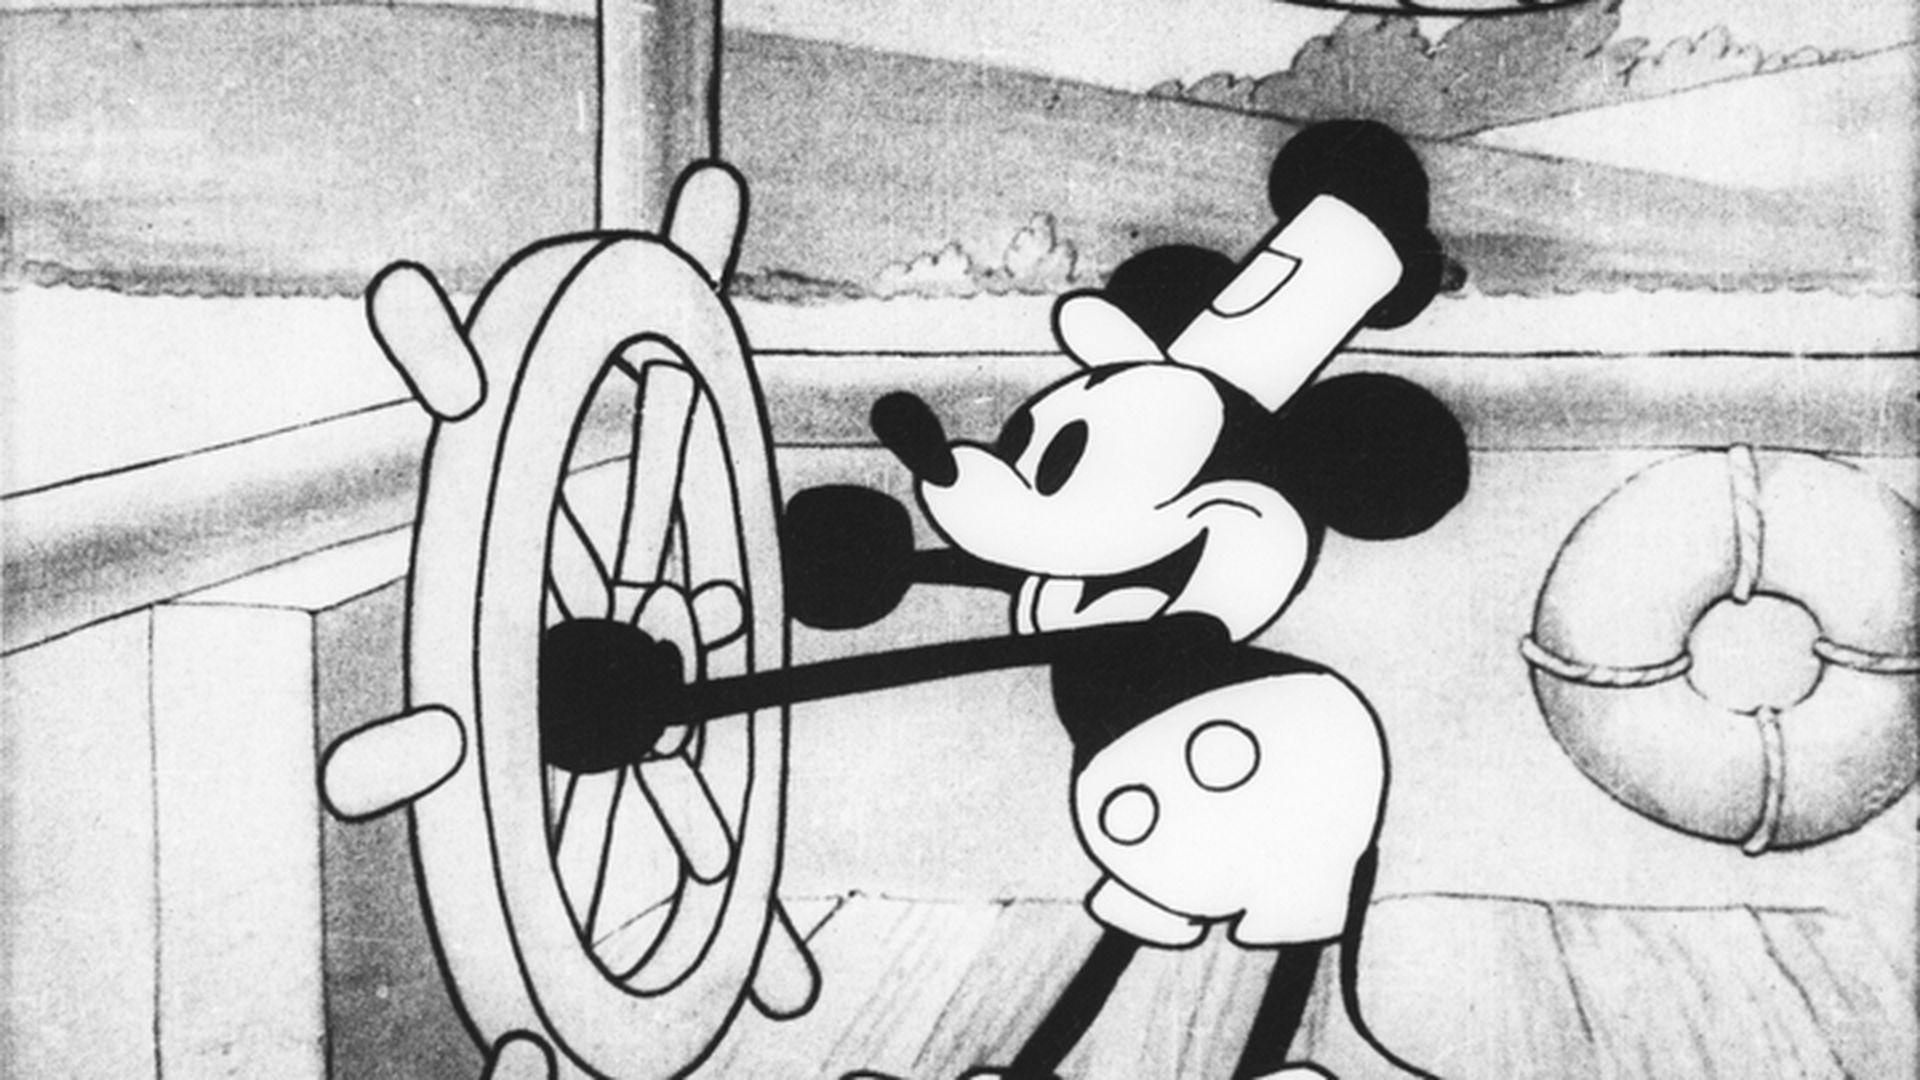 the internet copyright machine wasn’t made for mickey mouse